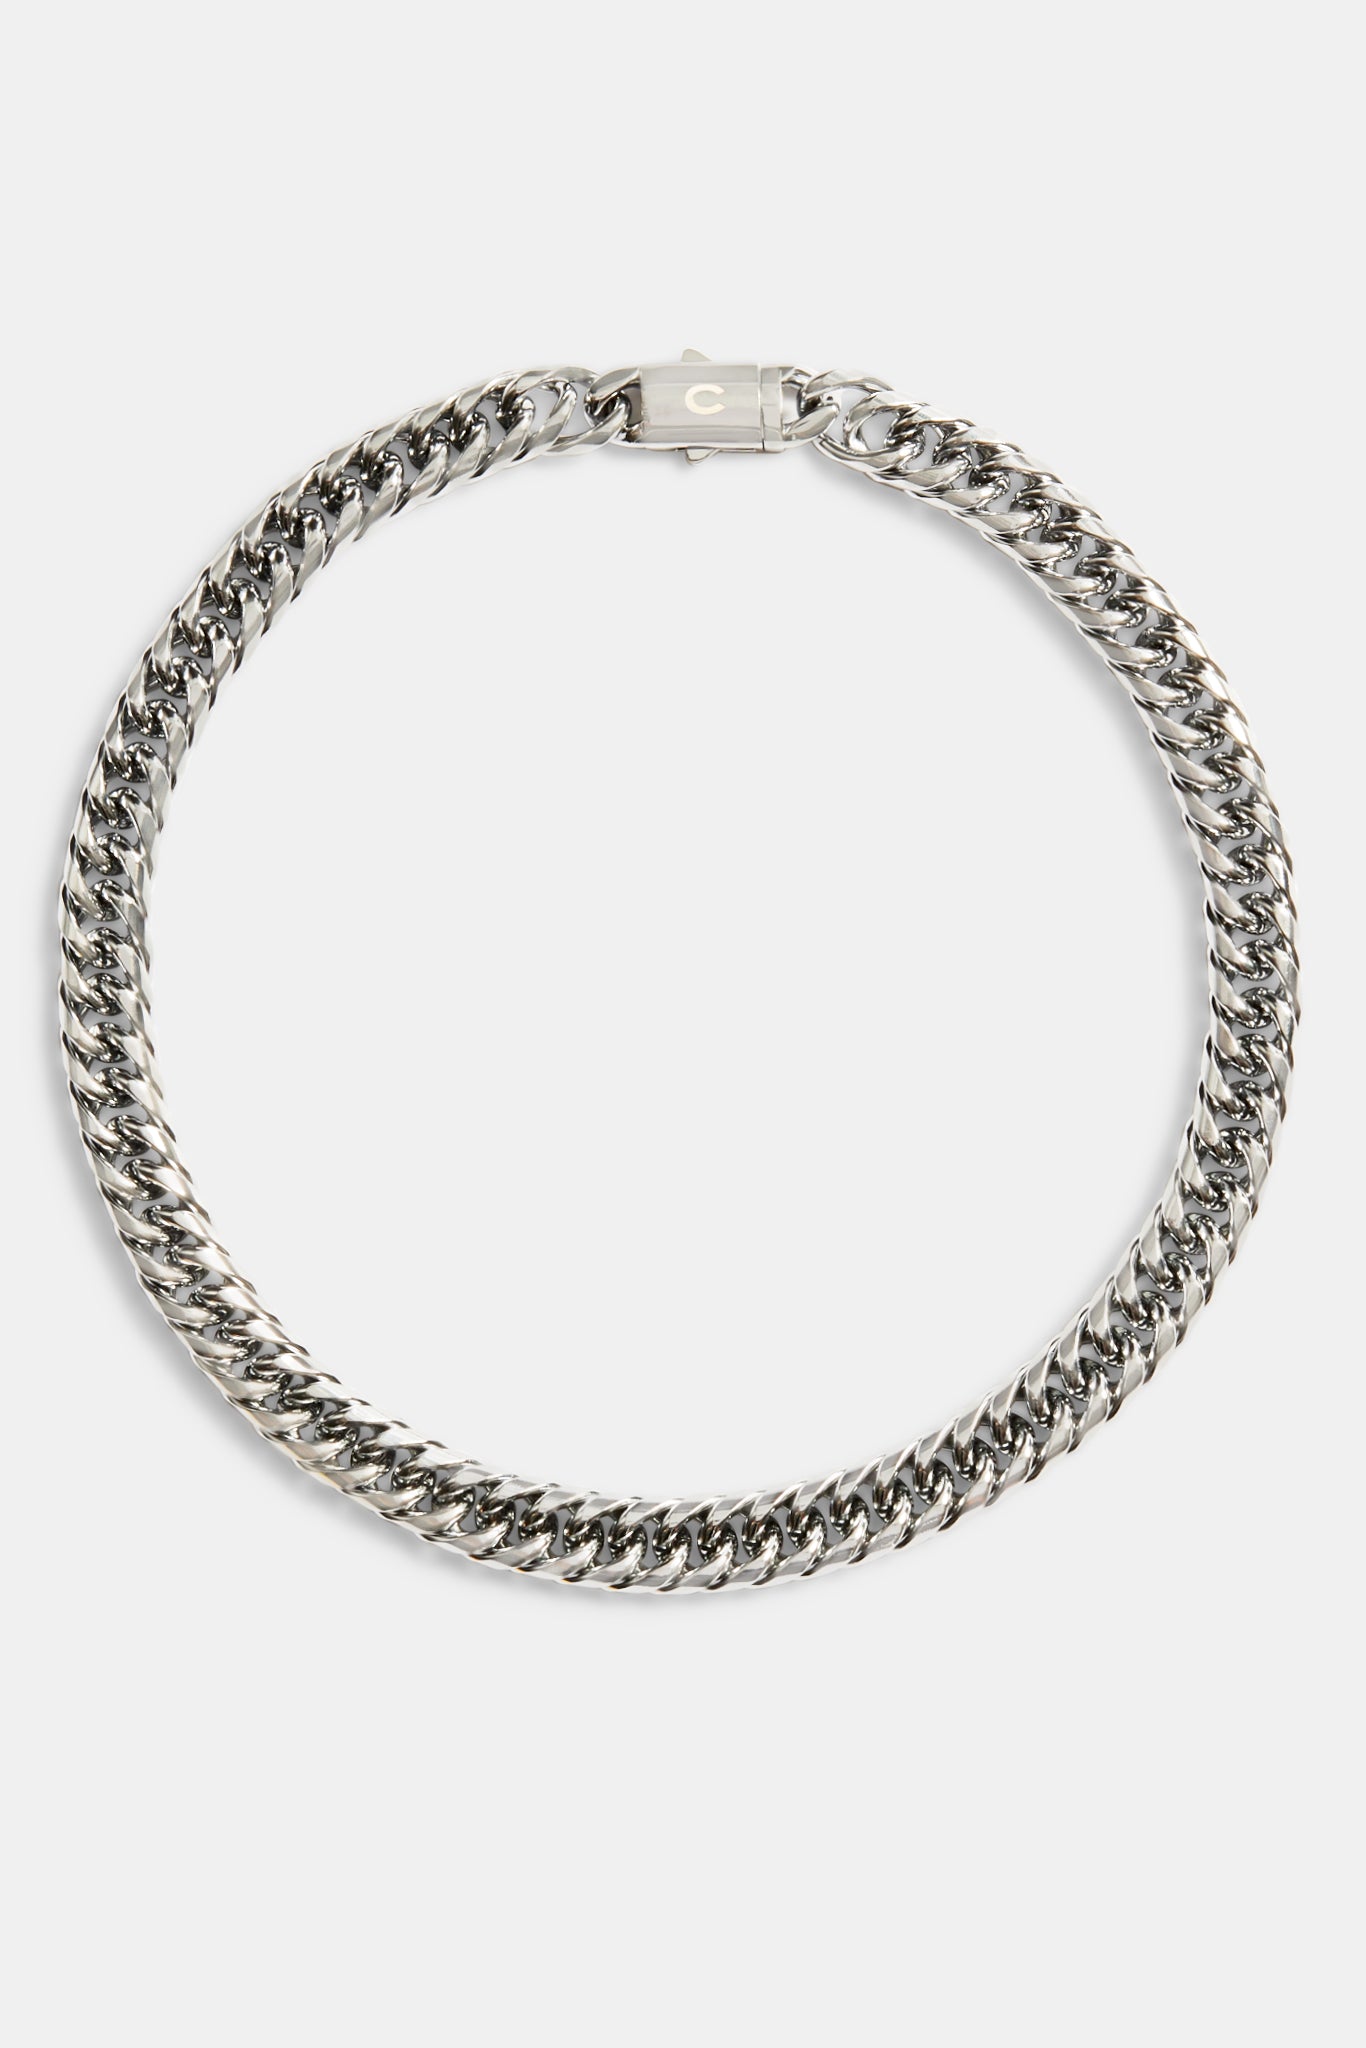 13mm Polished Cuban Link Chain - Stainless Steel | Mens Chains | Shop ...